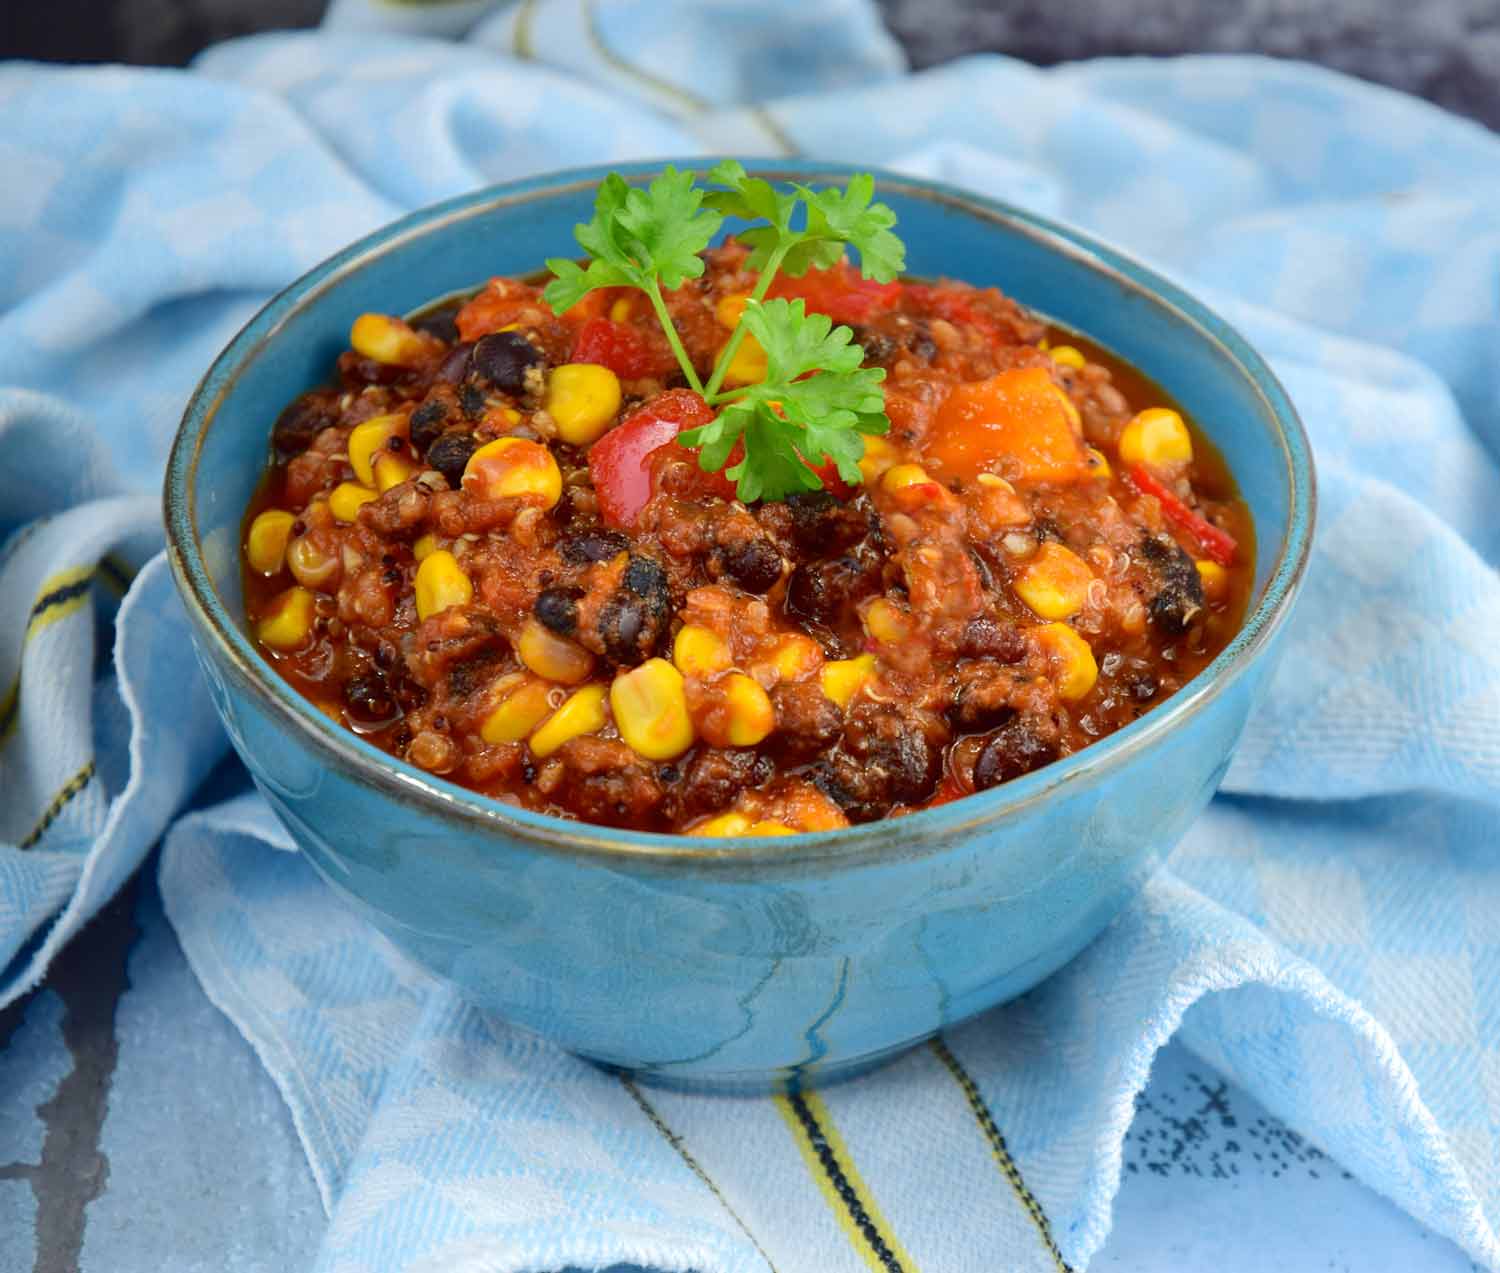 Vegetarian chili with black beans in a blue bowl